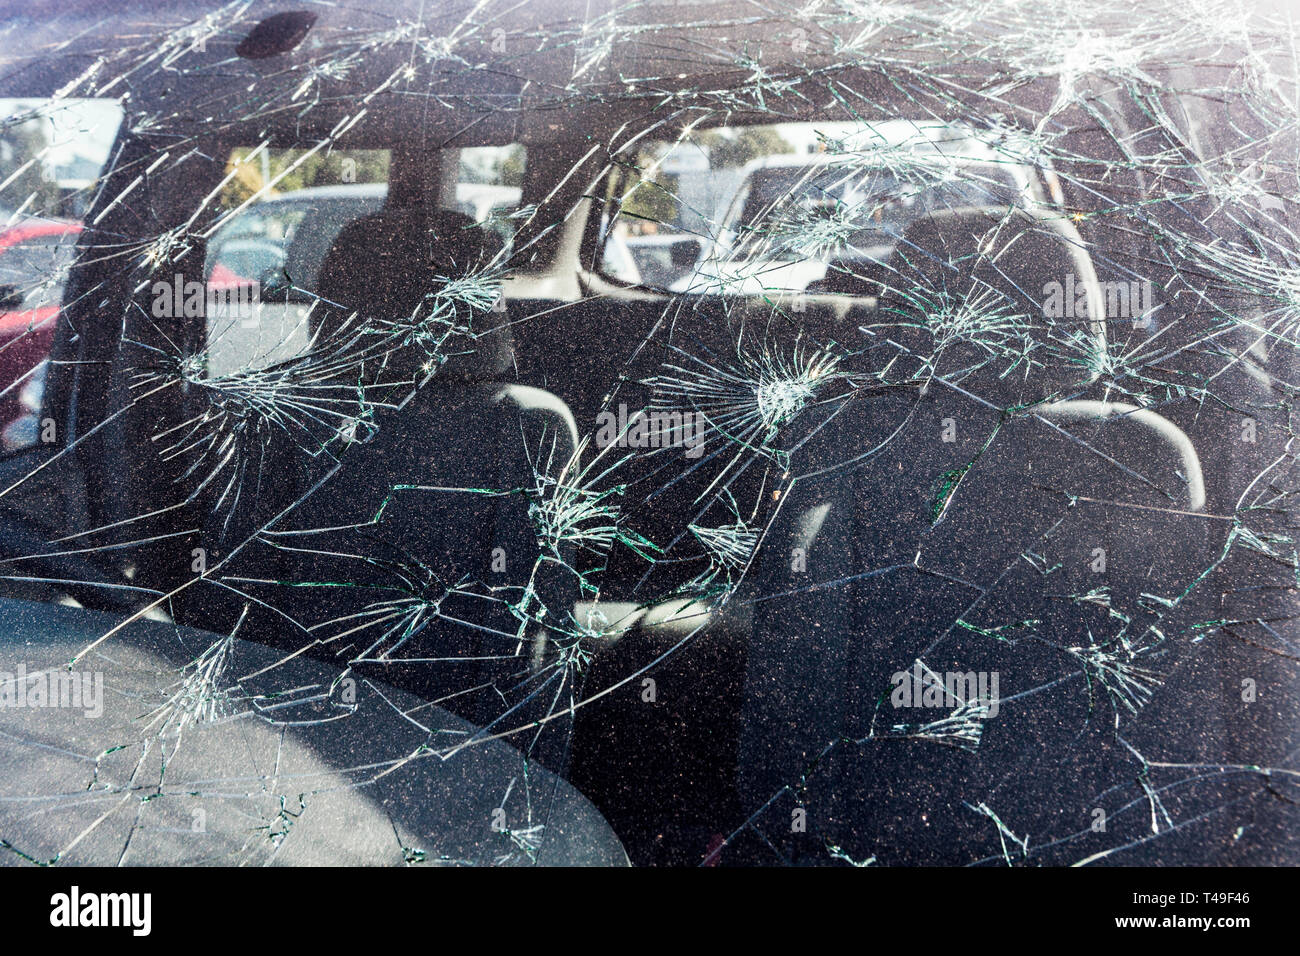 Hailstone damage on the front windscreen of a car Stock Photo